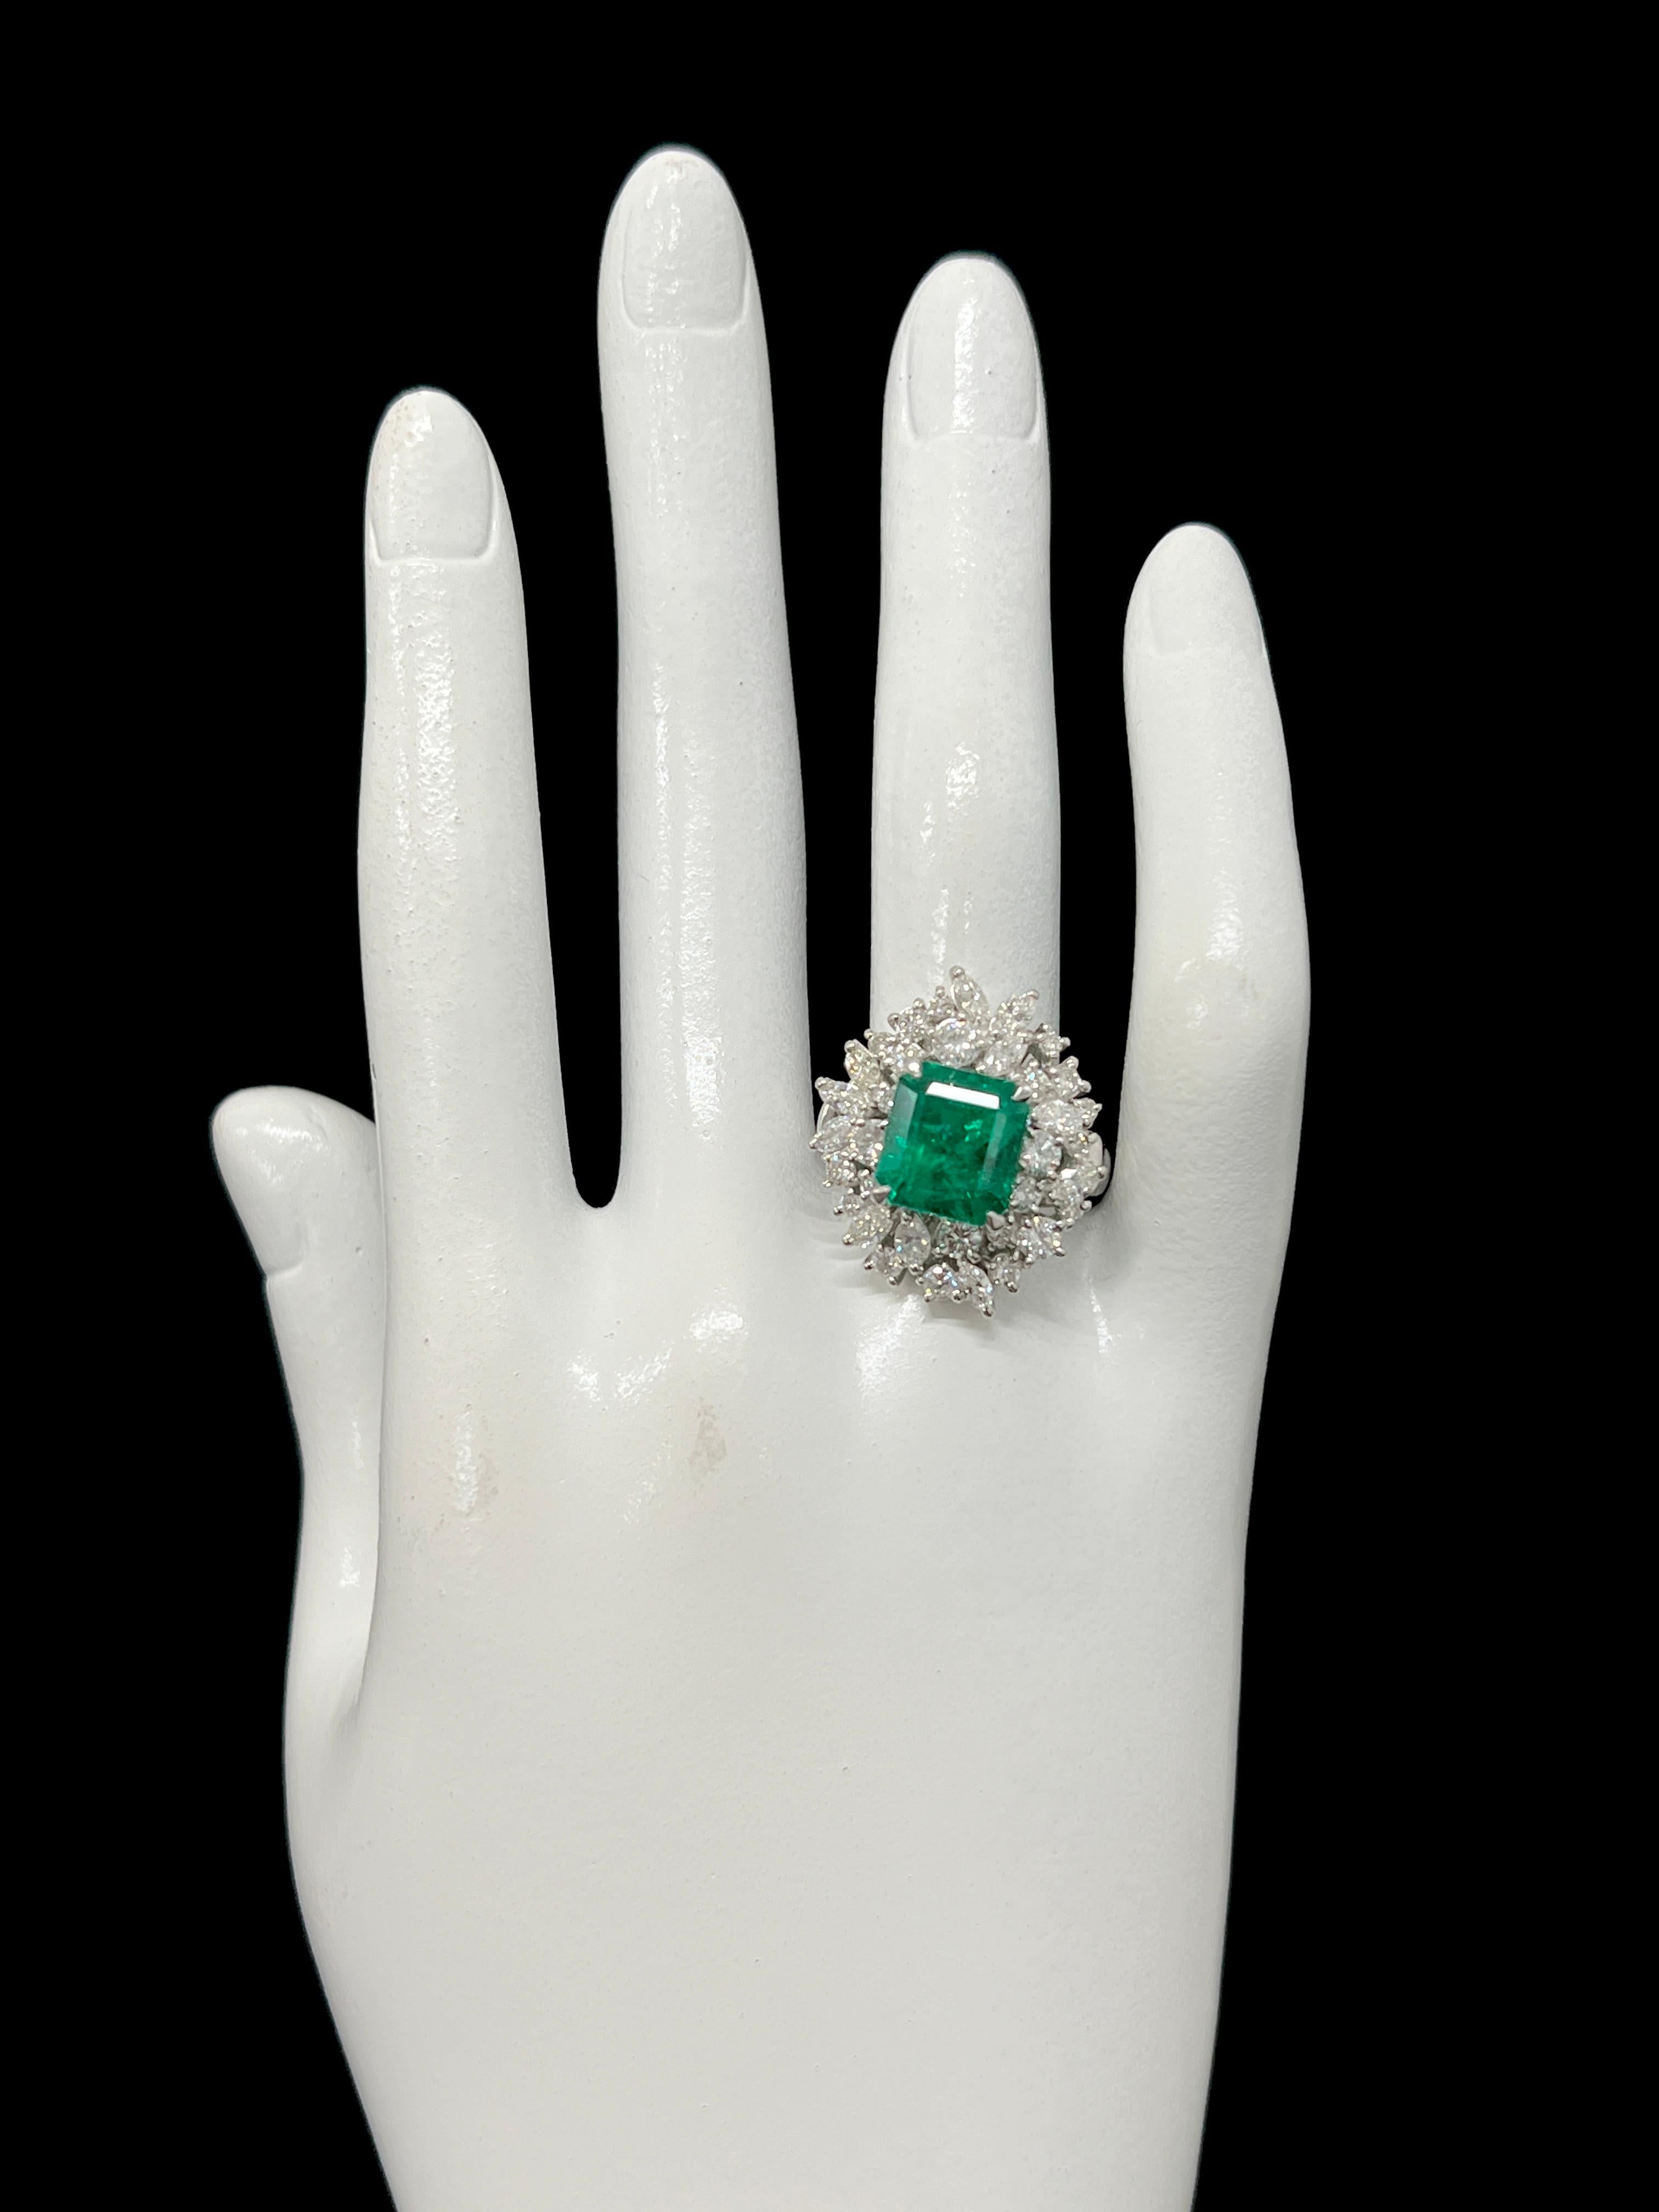 4.61 Carat Colombian, Muzo Color Emerald & Diamond Cocktail Ring Set in Platinum For Sale 1